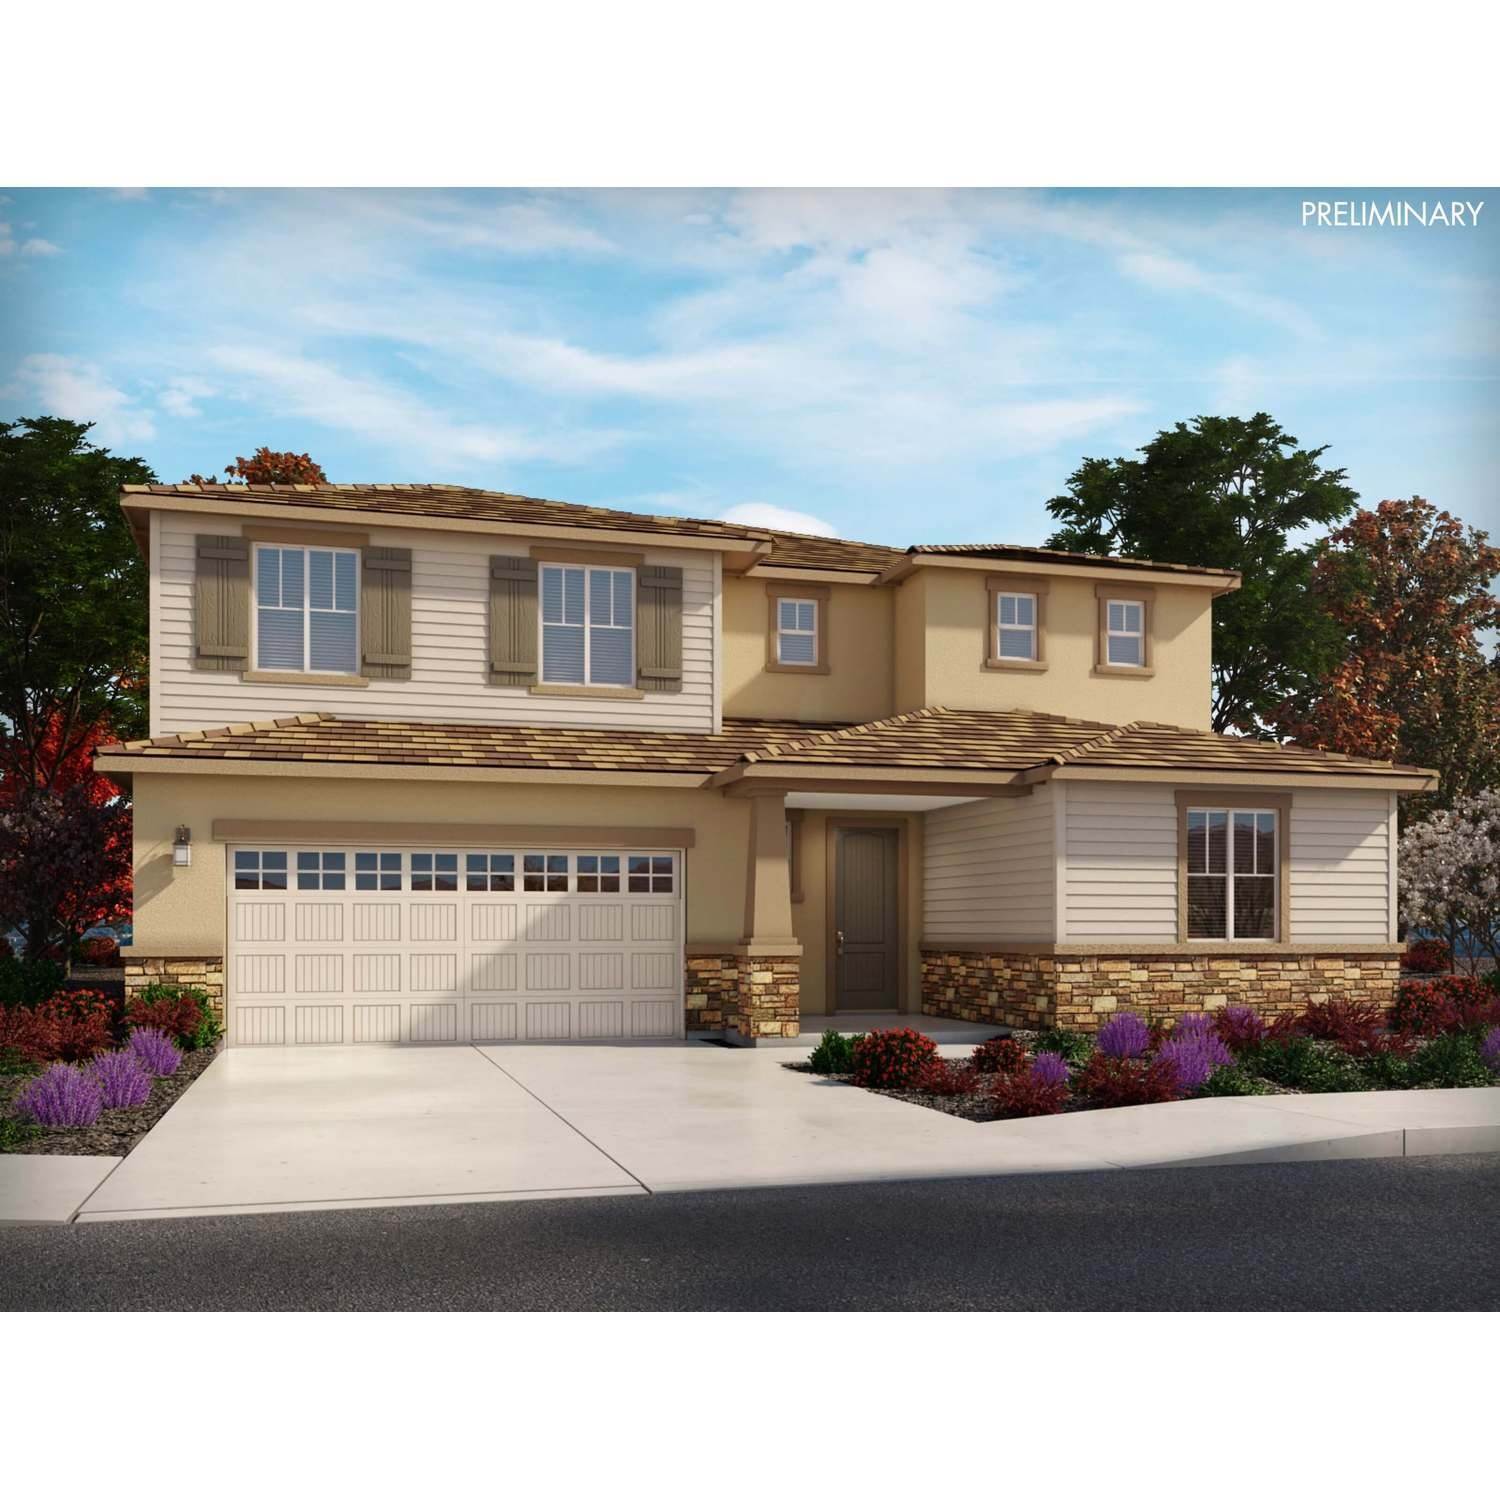 Single Family for Sale at Winters, CA 95694